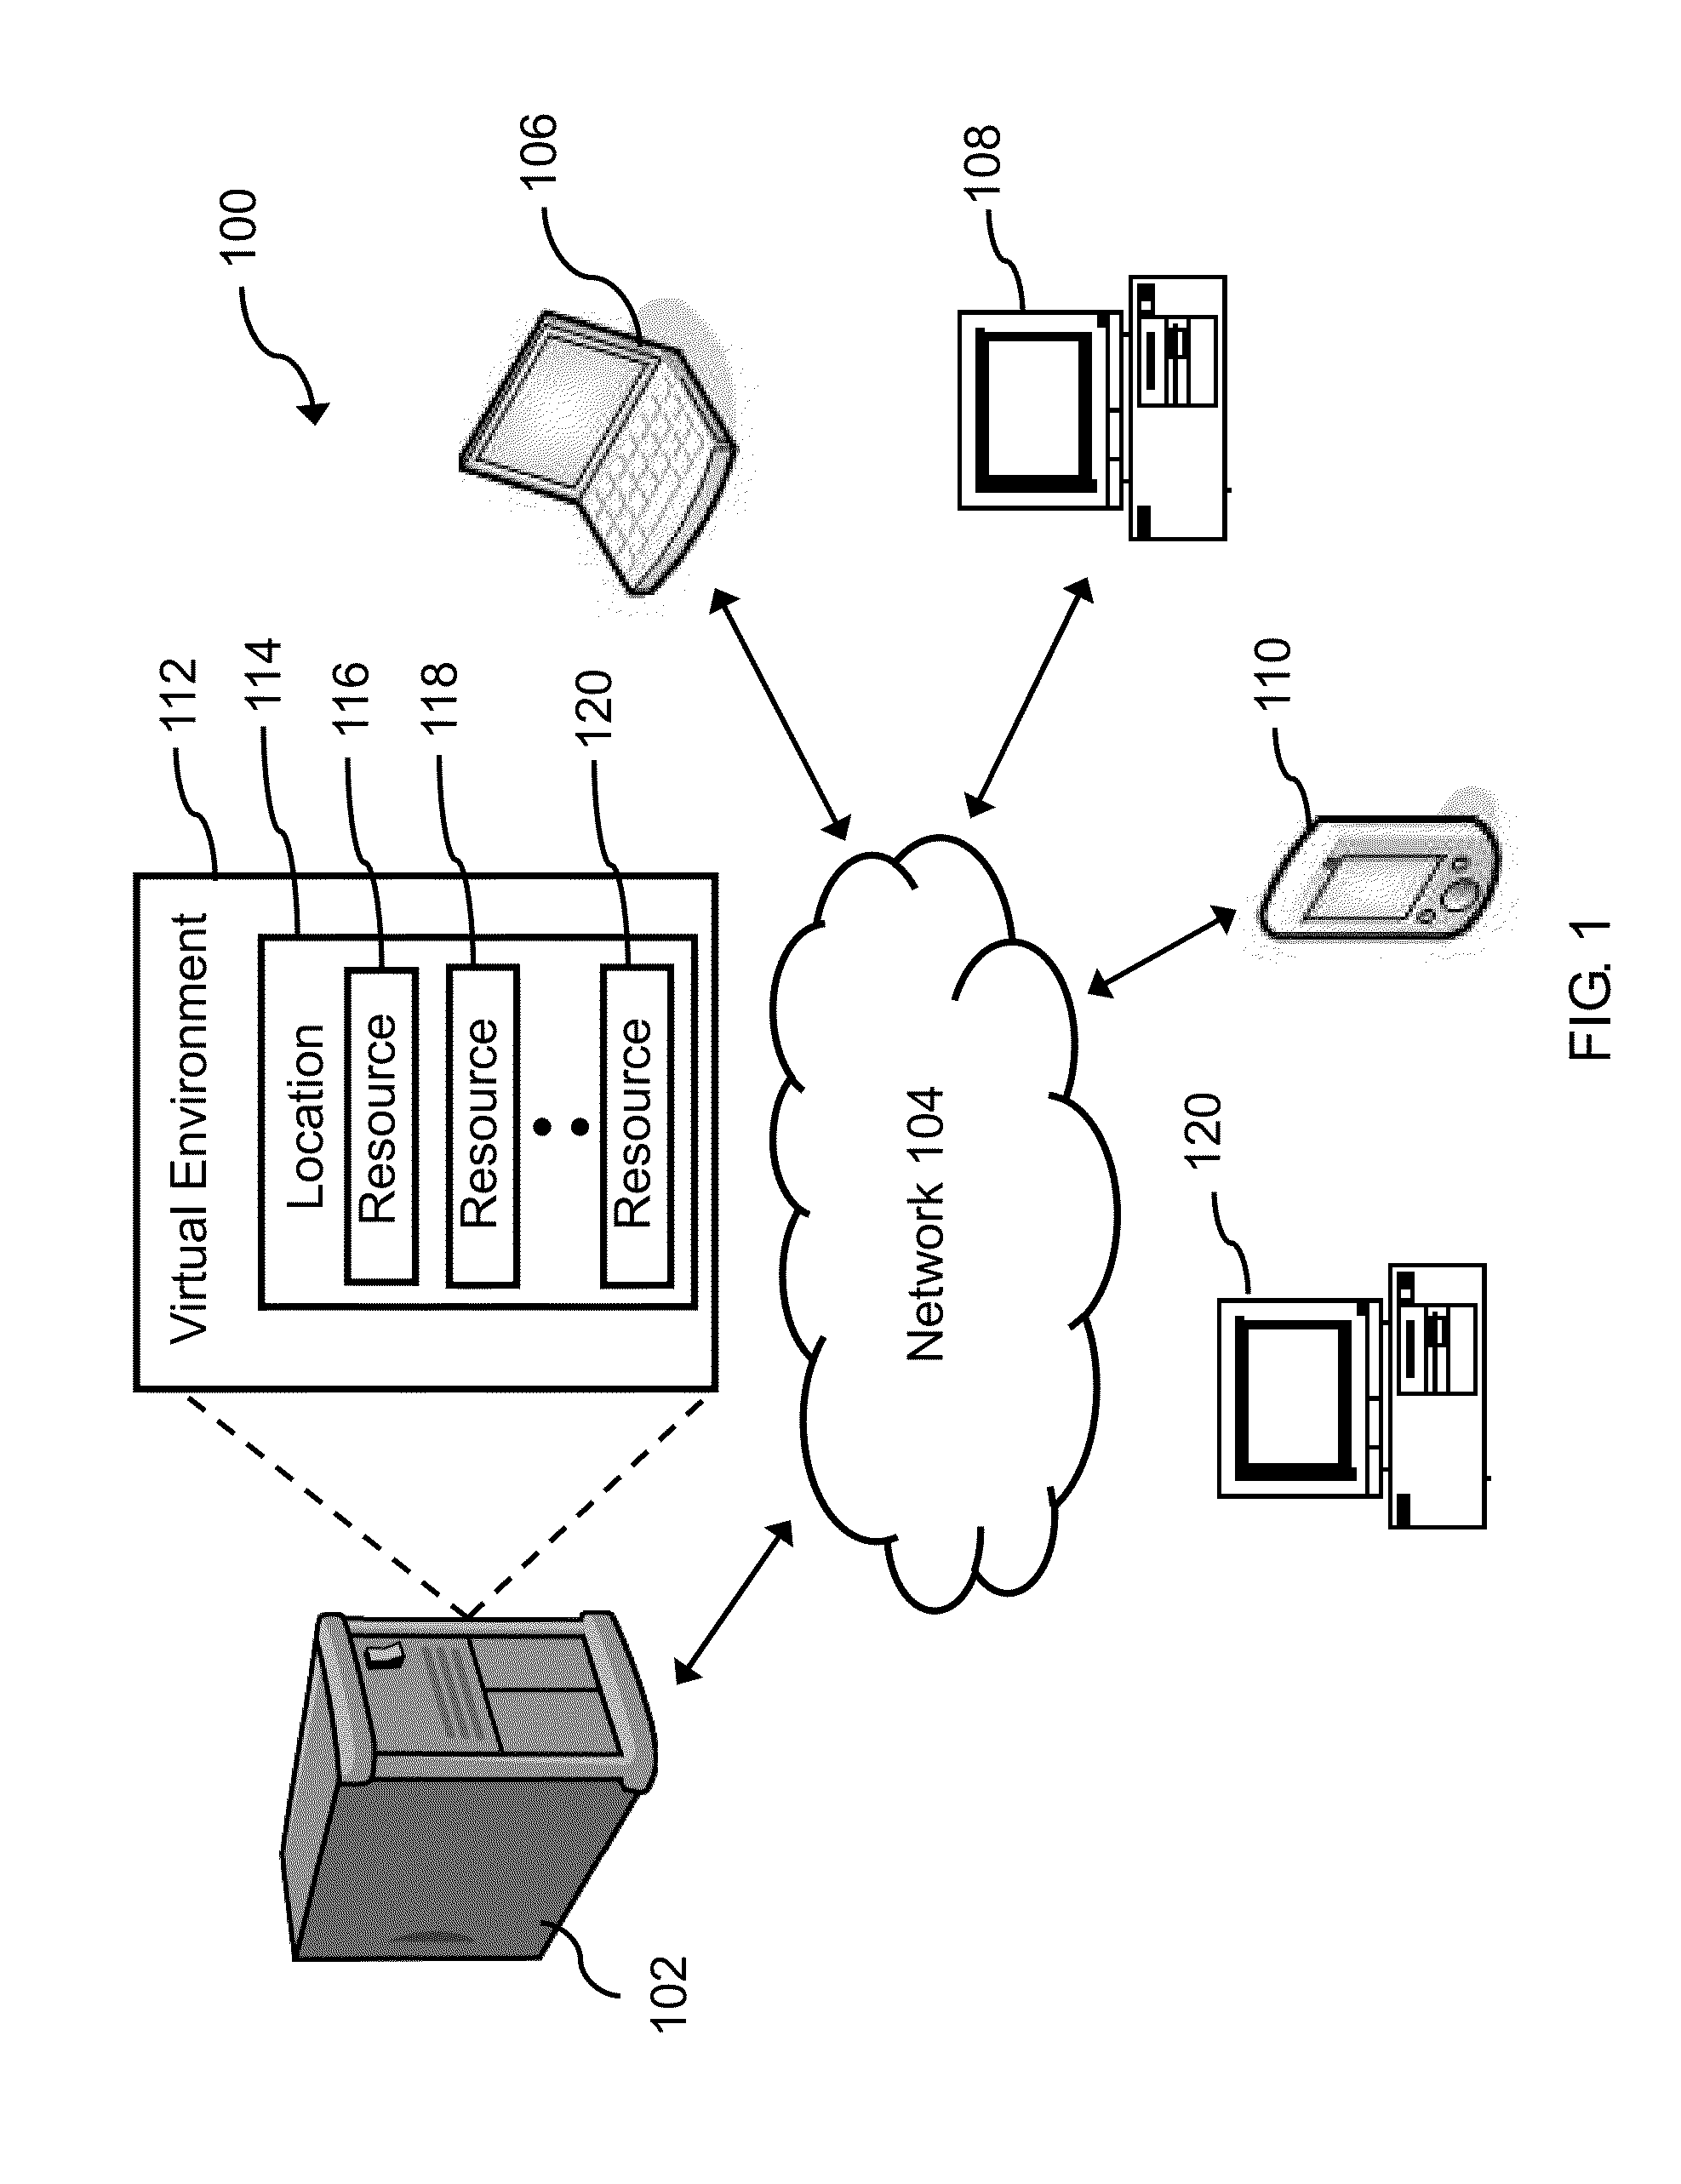 Systems and methods for managing an infrastructure using a virtual modeling platform